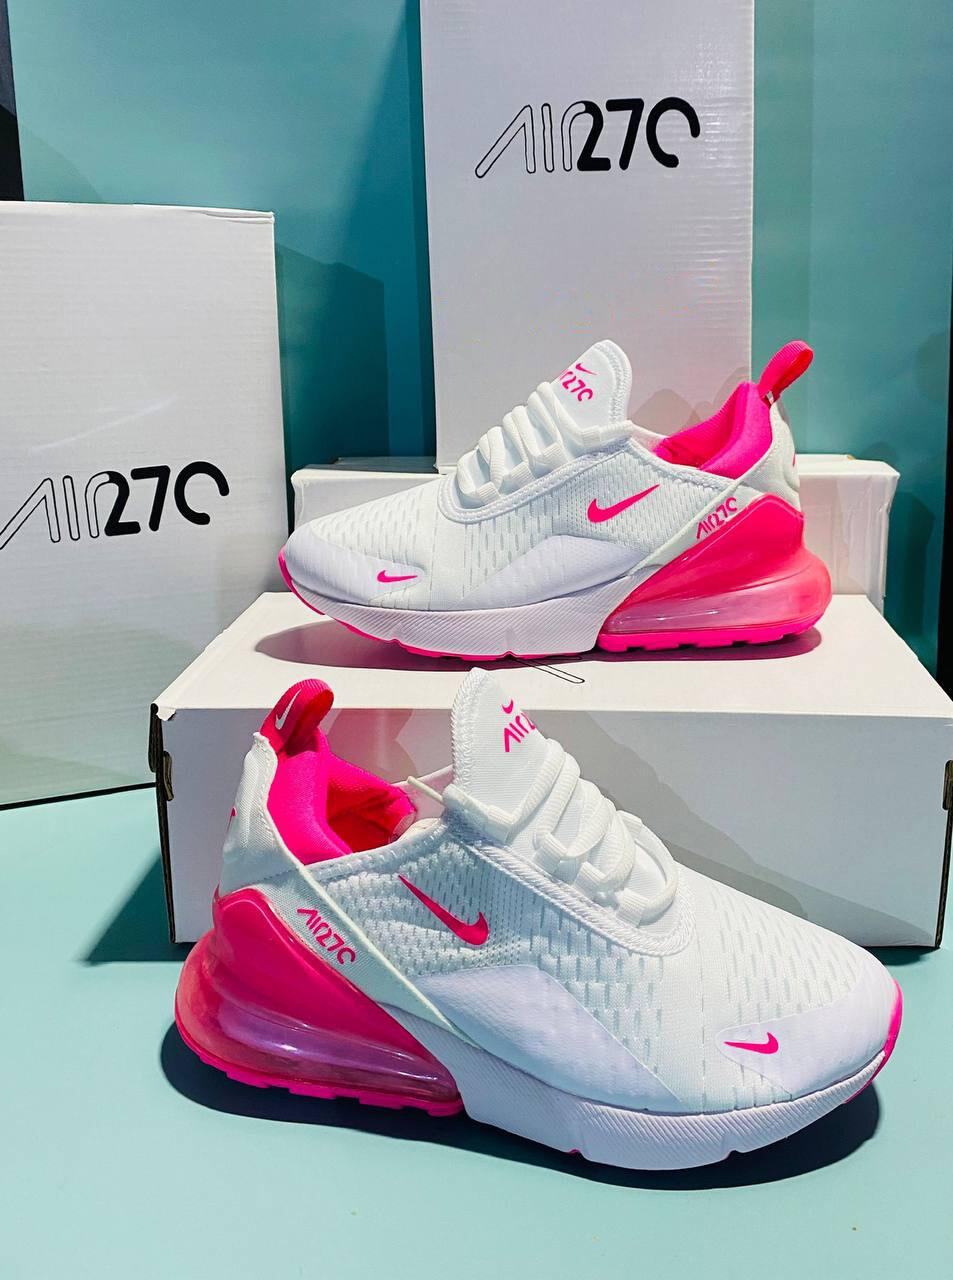 White Nike Trainers Womens 270s Pink